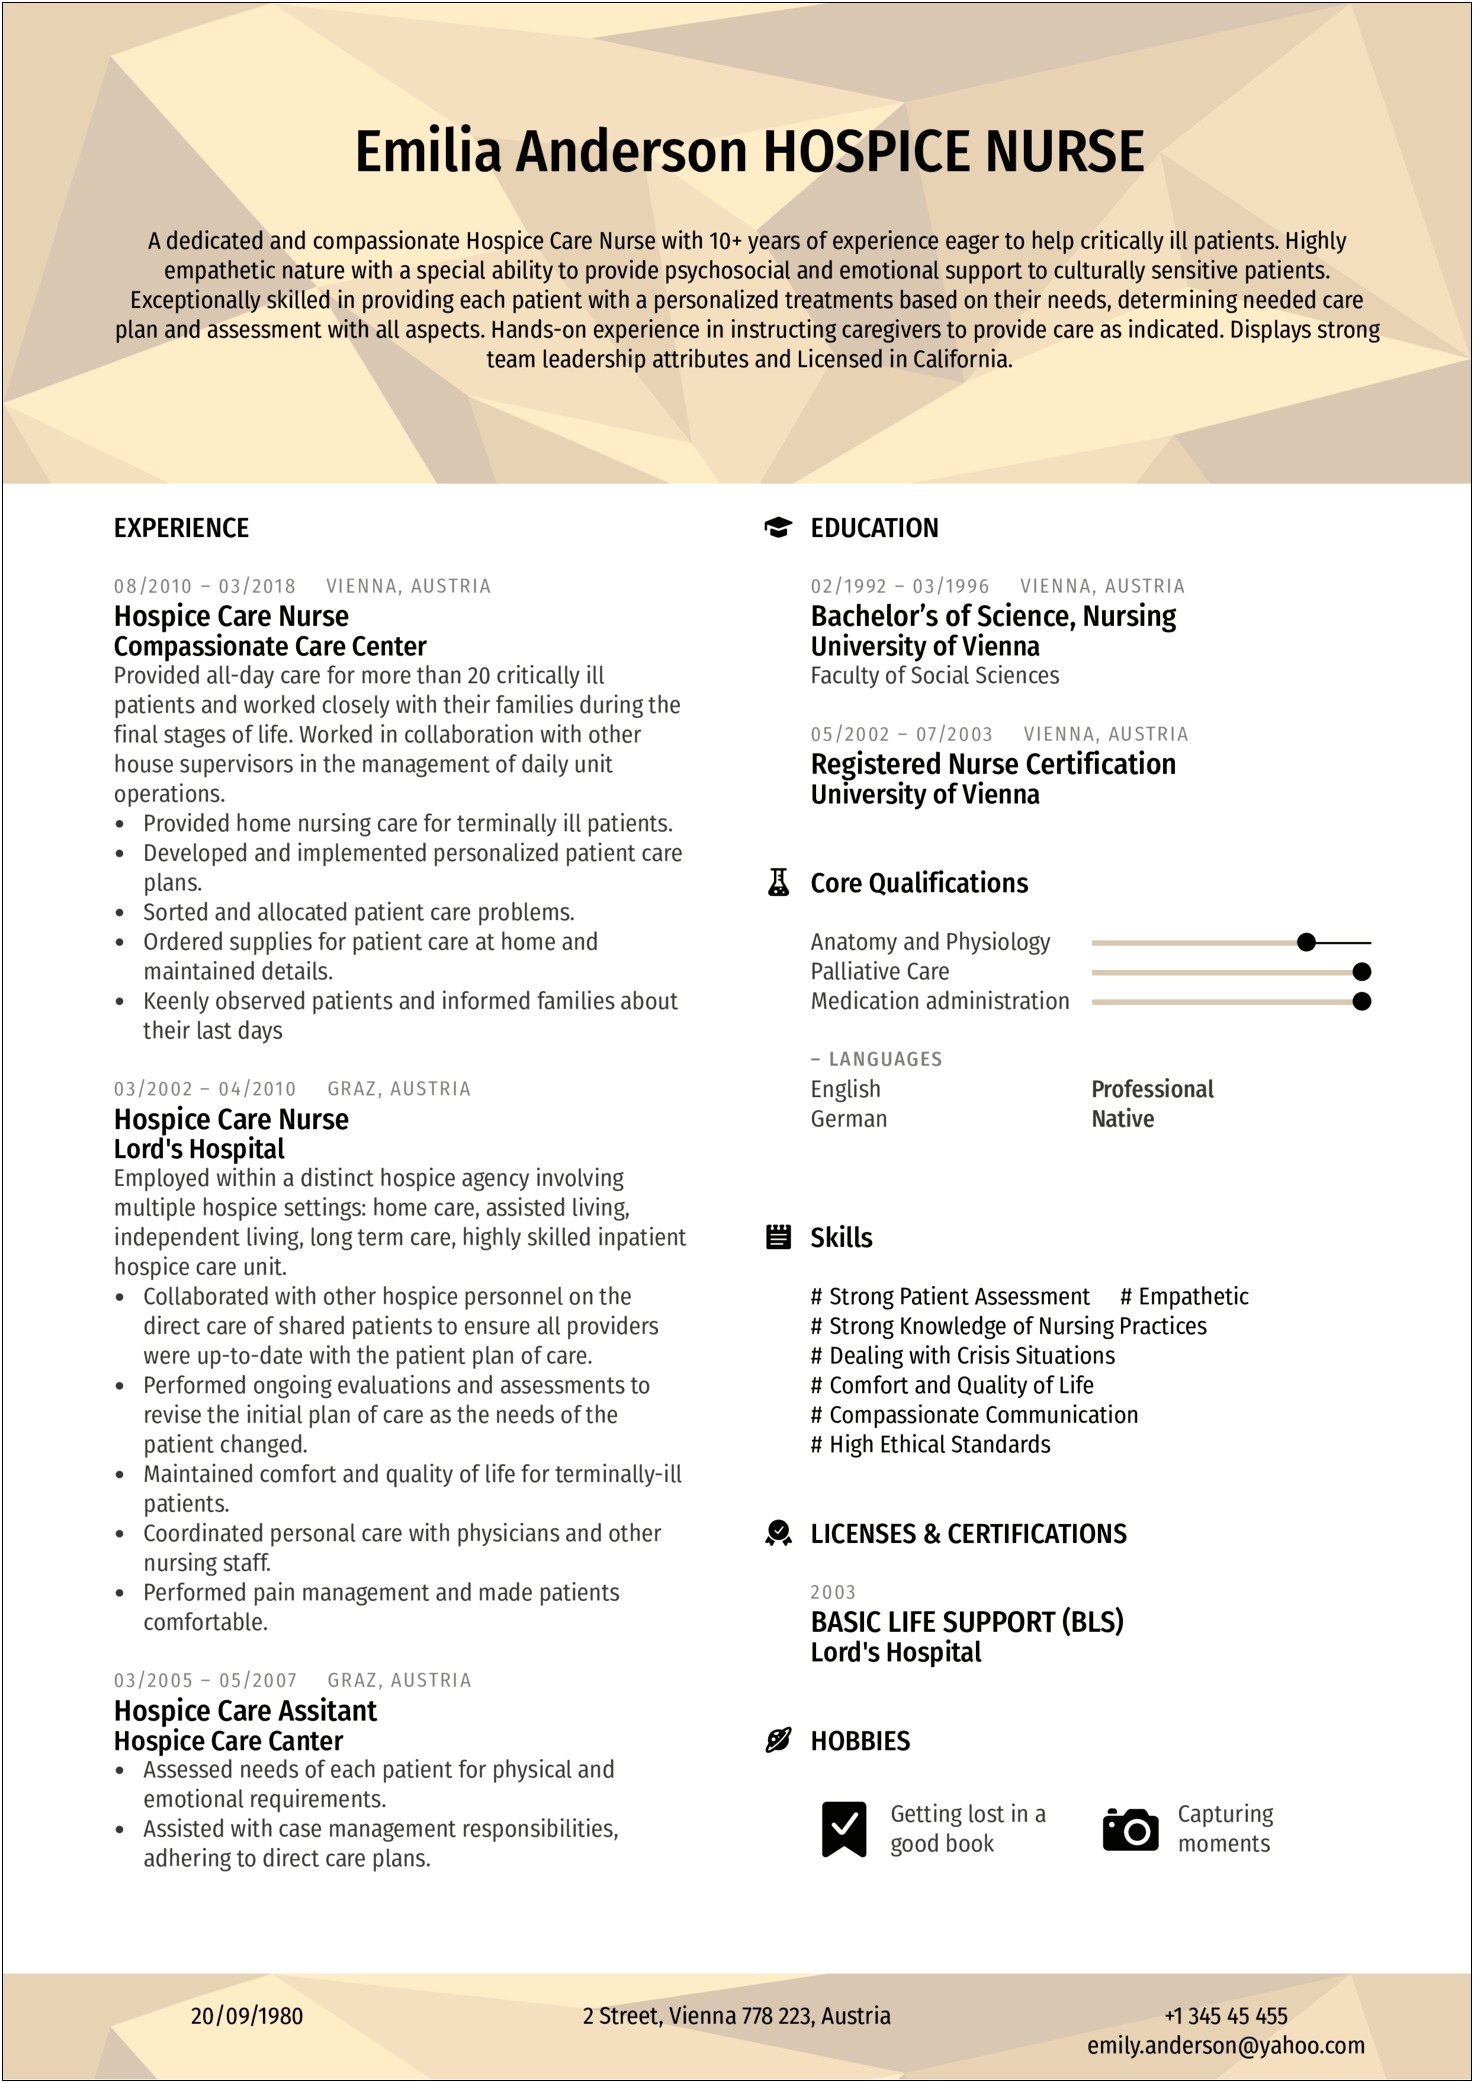 Resume Template For Direct Care Counselor